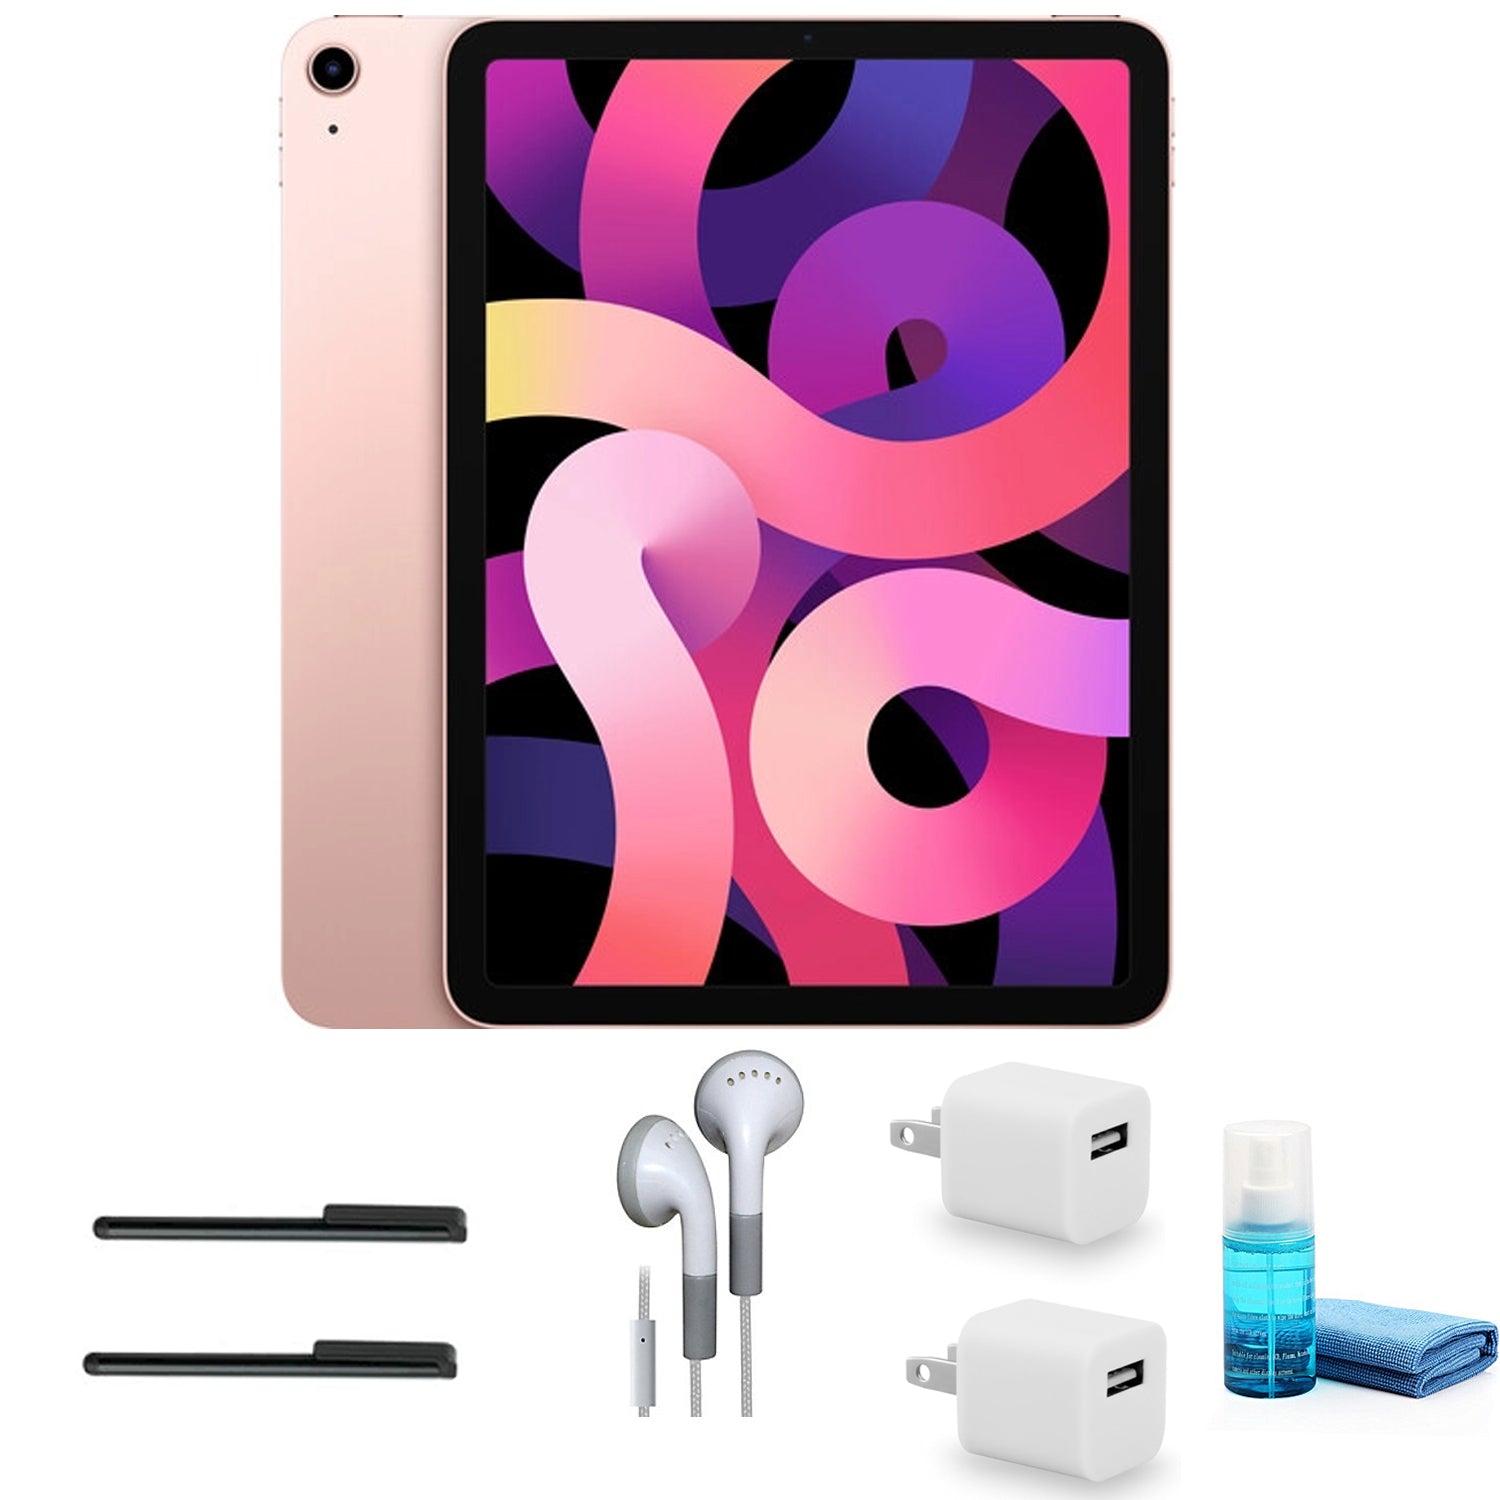 Apple 10.9 Inch iPad Air (64GB, Wi-Fi Only, Rose Gold) with Earbuds + More